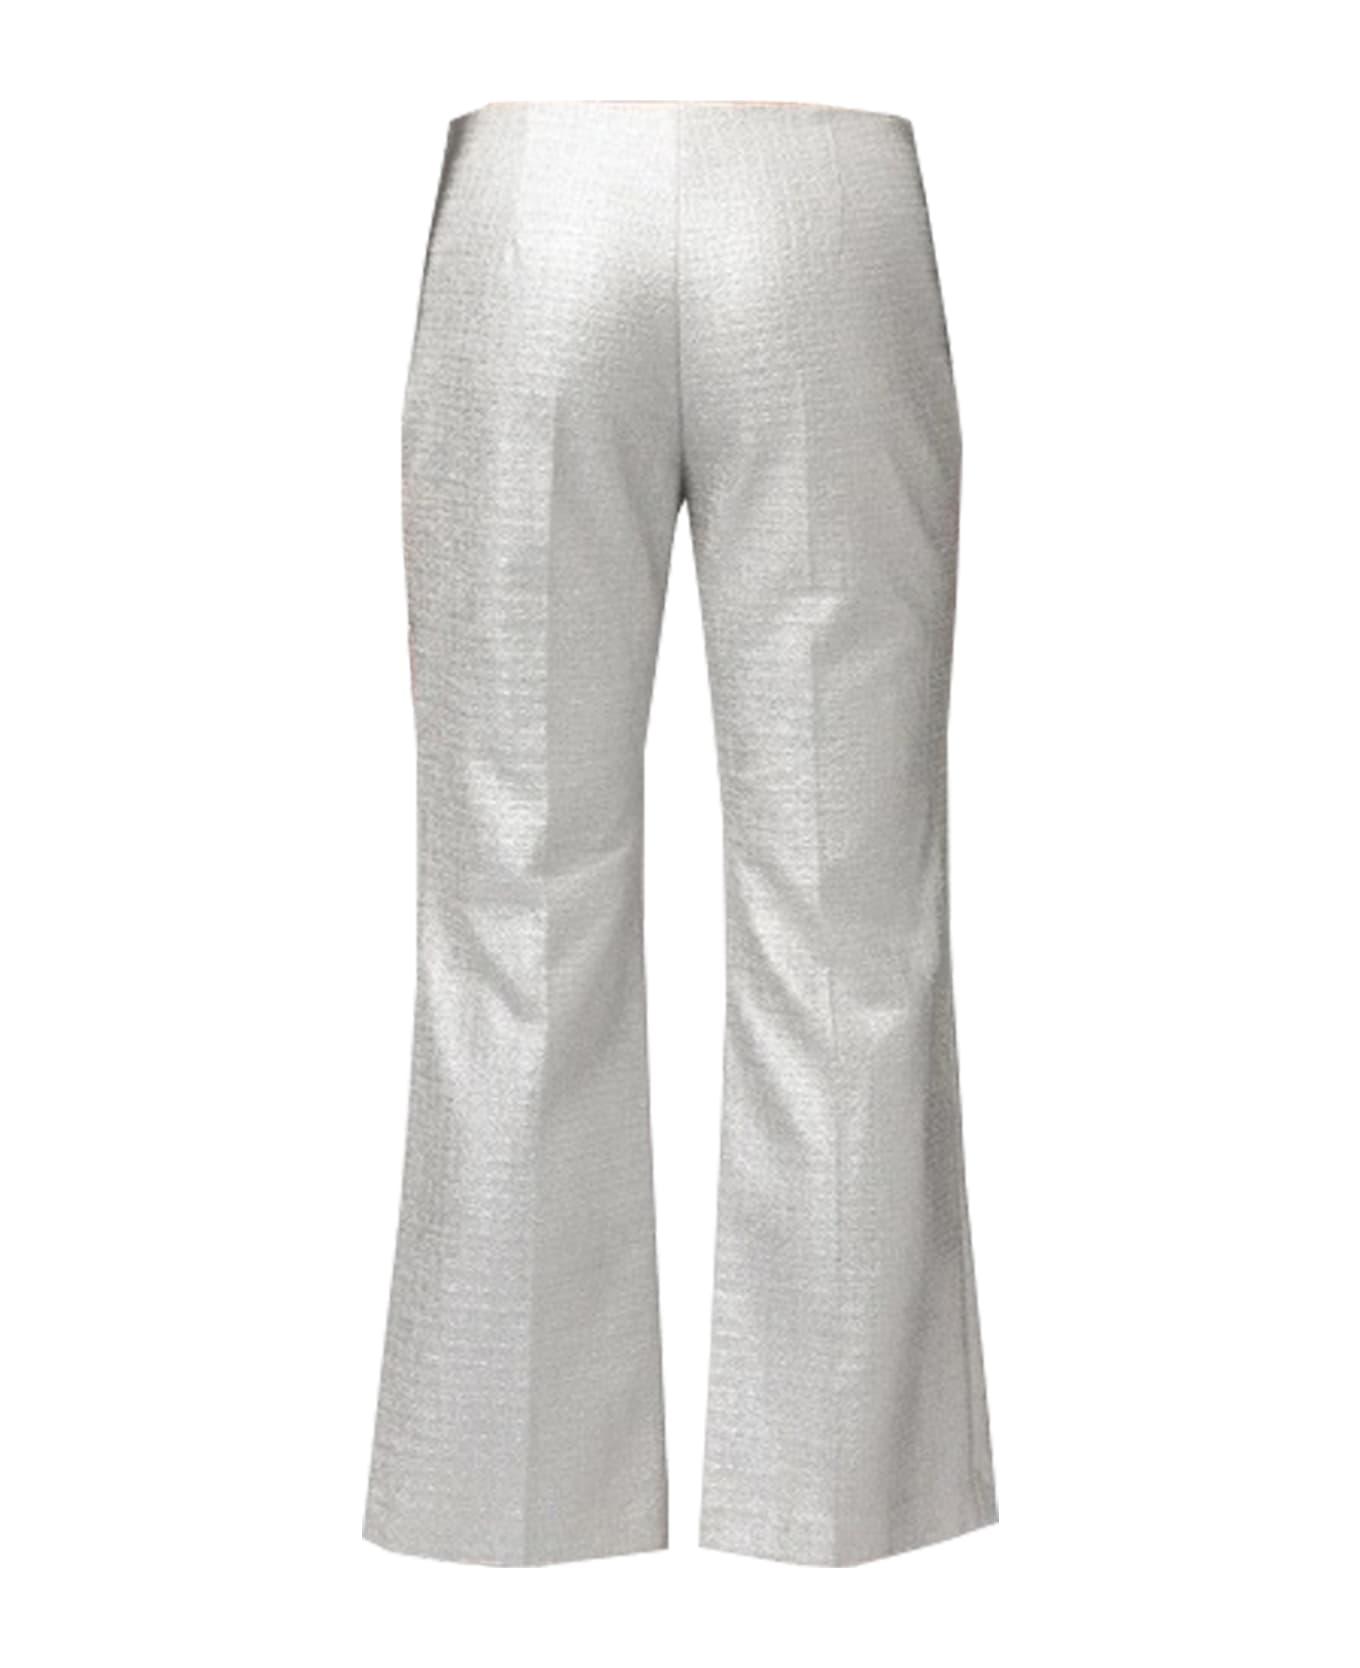 Elisabetta Franchi 'events' Trousers - SILVER ボトムス